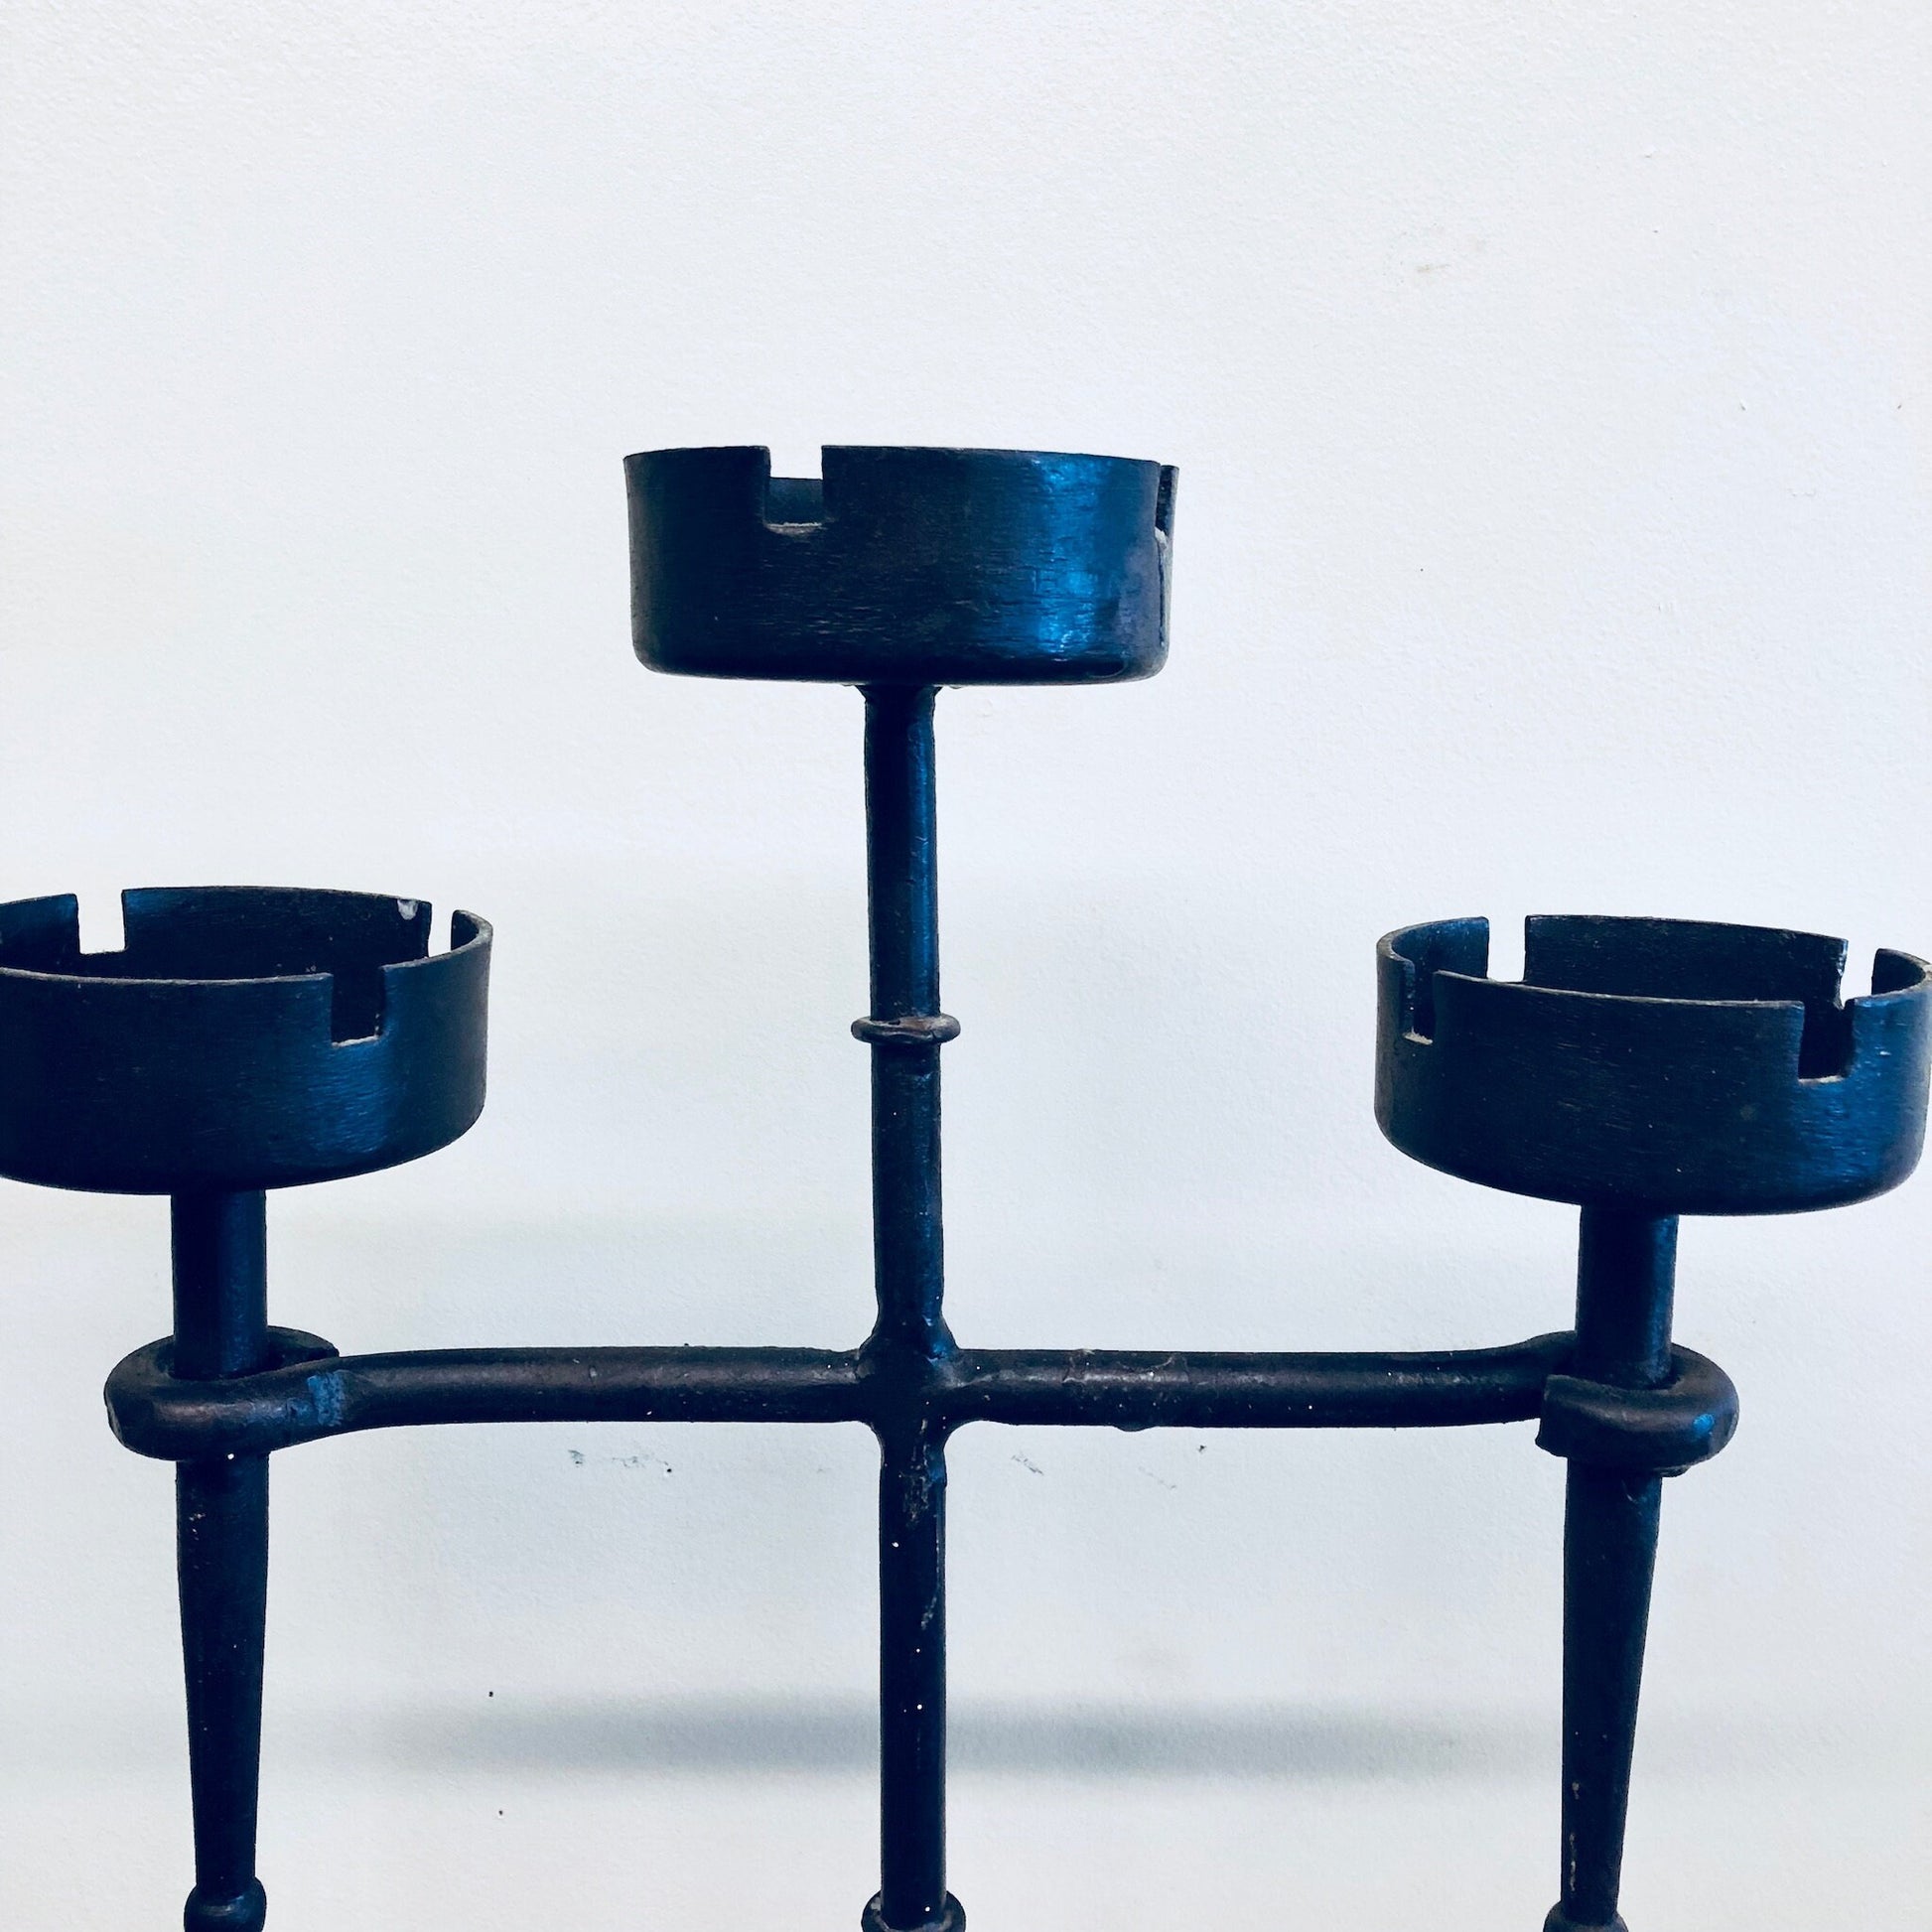 Vintage wrought iron candle holder with three candlesticks, rustic navy blue finish, suitable for use as a centerpiece, mantelpiece decor or ashtray.